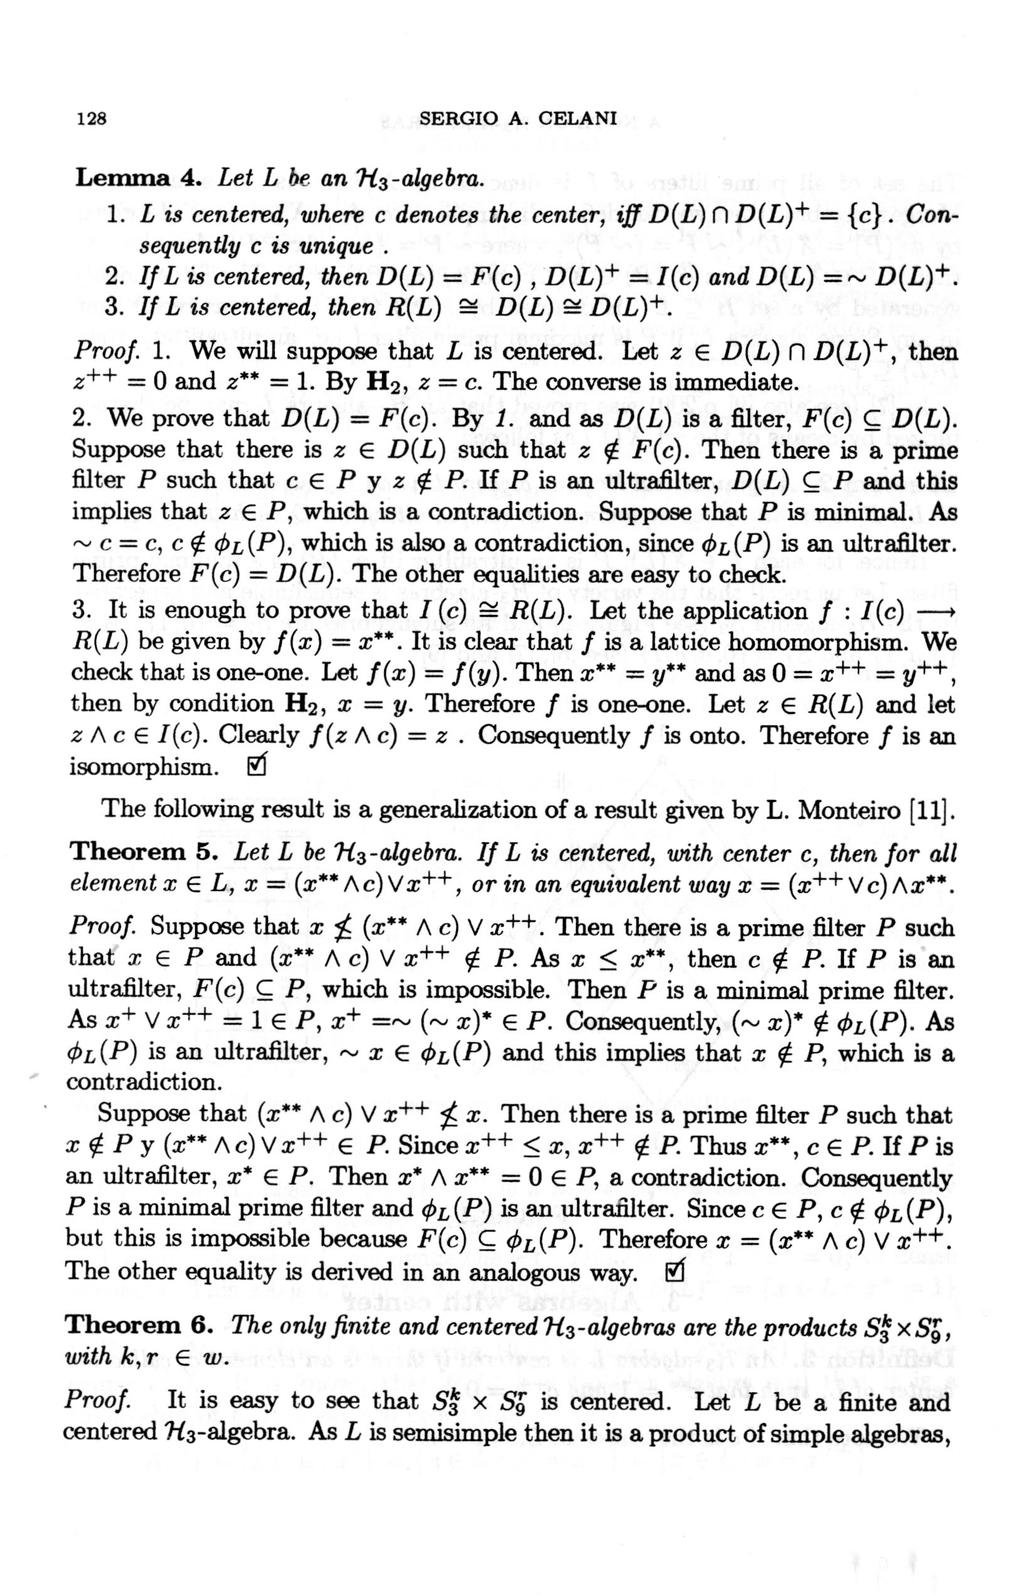 128 SERGIO A. CELANI Lemma 4. Let L be an 1i3 -algebra. 1. L is centered, where c denotes the center, iff D(L) n D(L)+ = [c}. Consequently c is unique. 2.